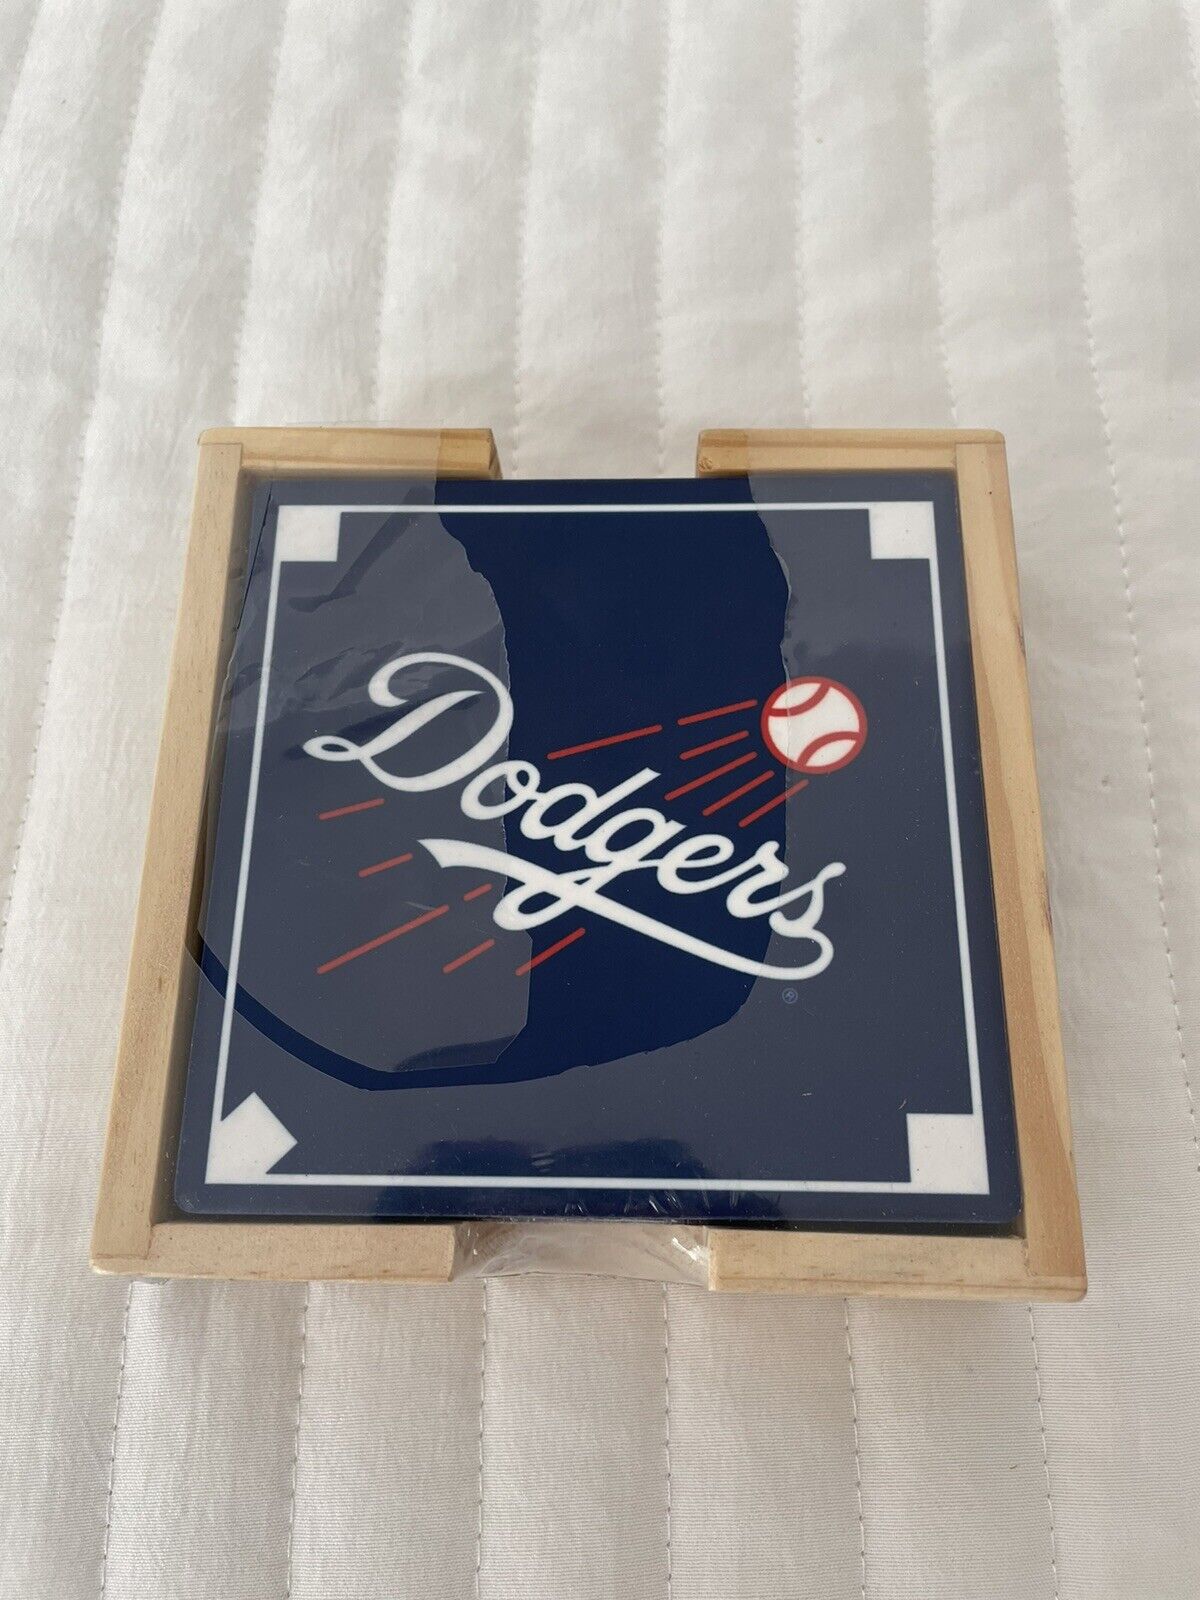 L.A. Dodgers Baseball Team Arco Gas 4 Ceramic Tile Drink Coasters (NEW) UNOPENED